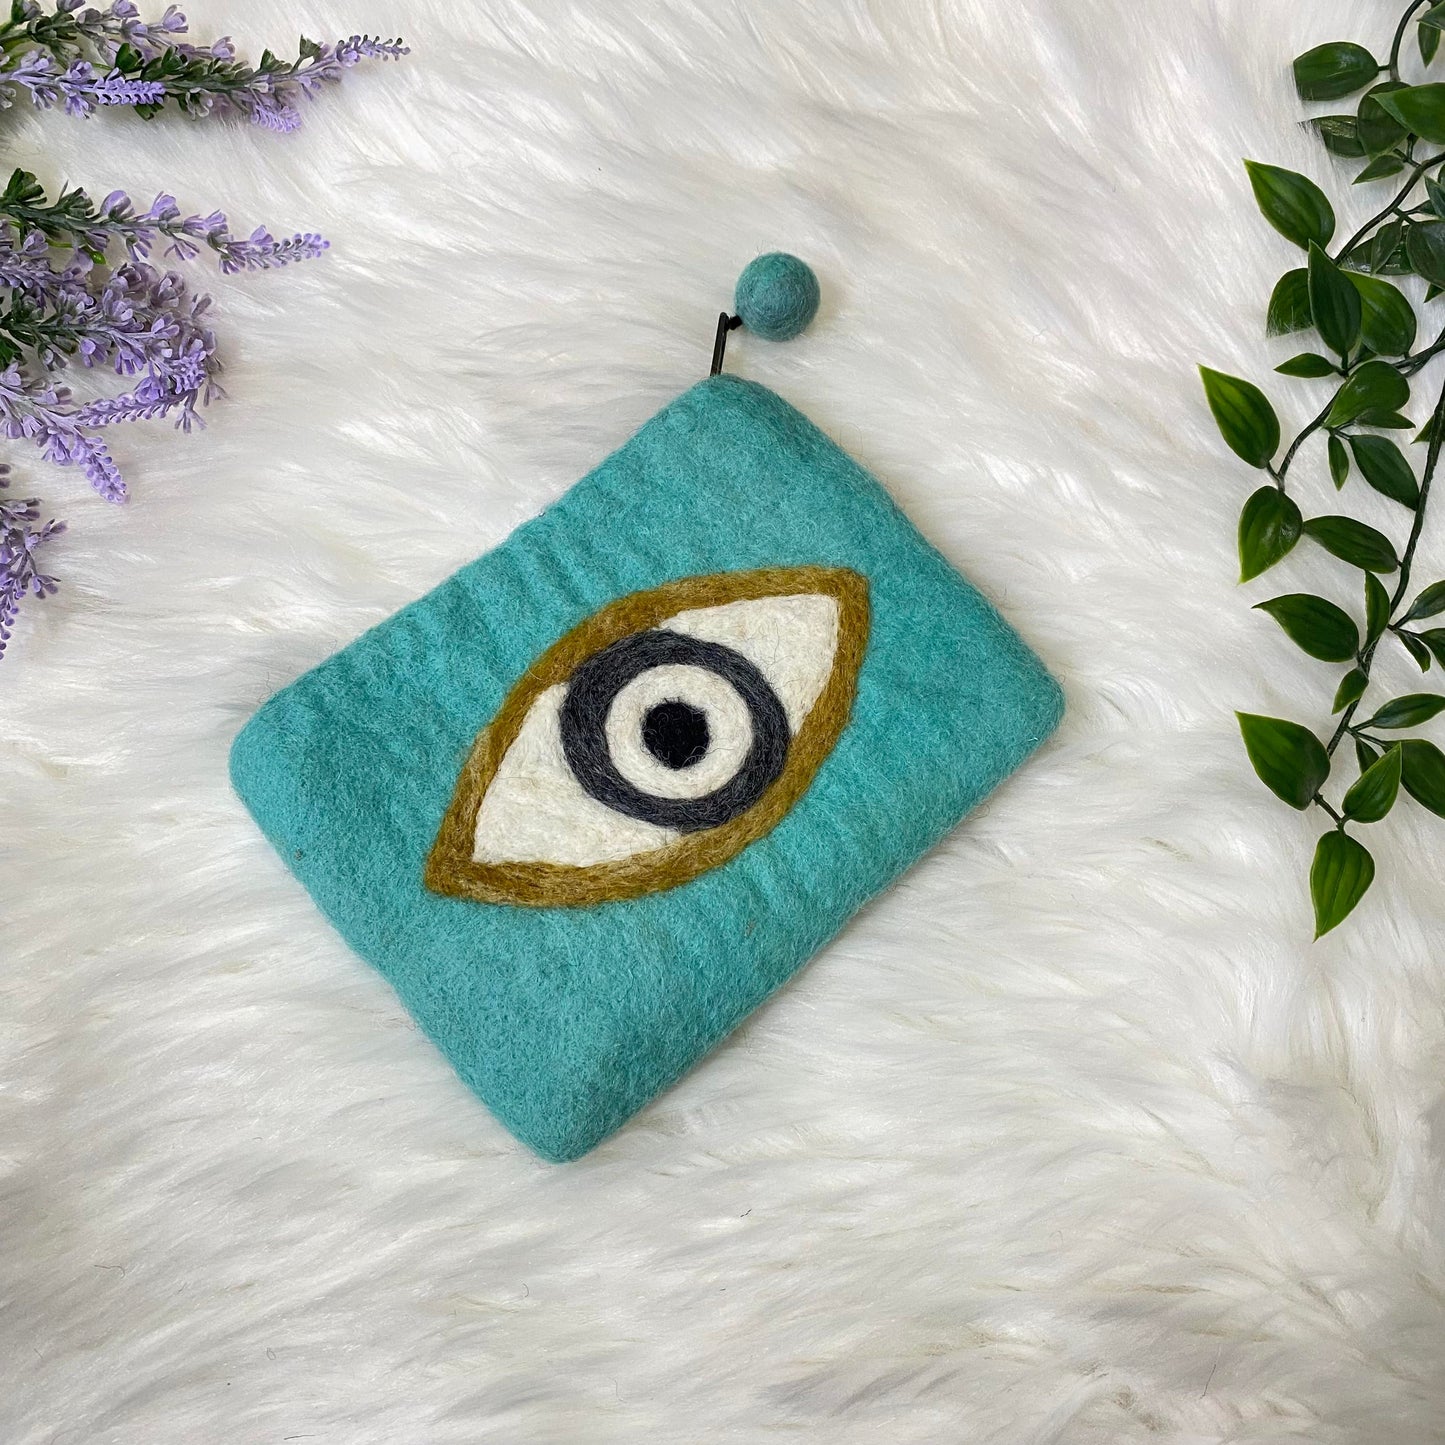 Small Felted Purse with Eye Designed